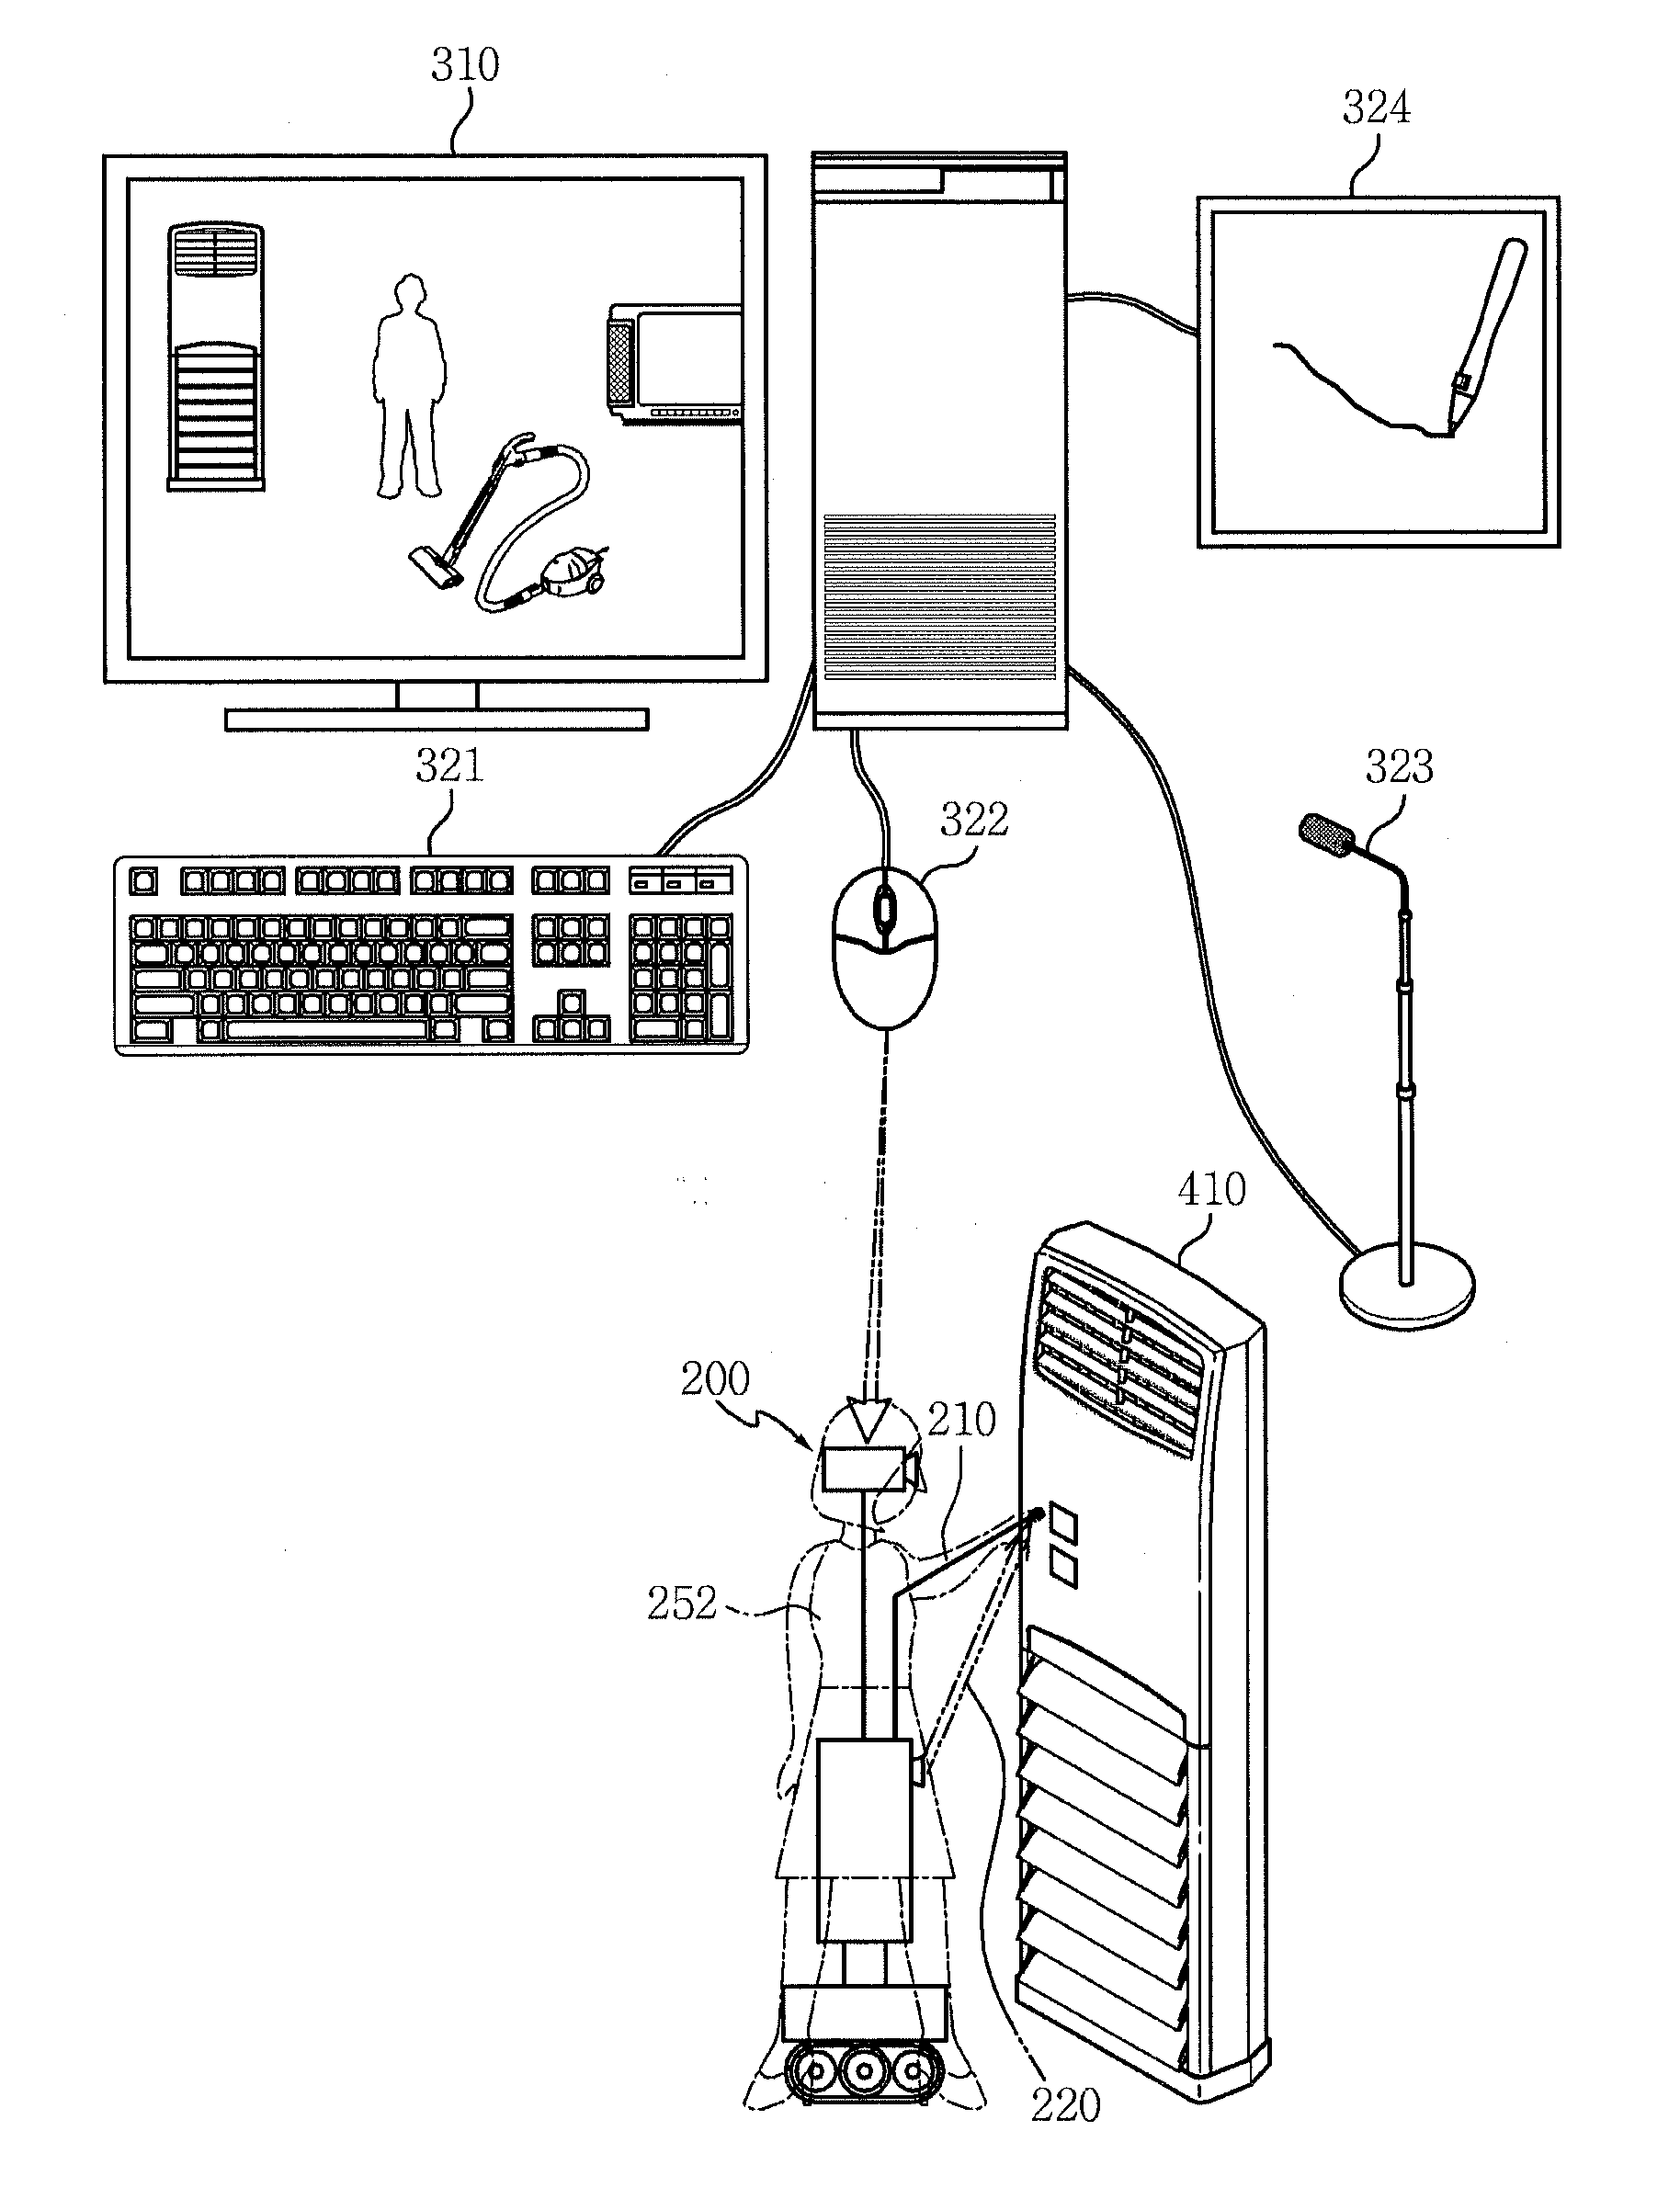 Visual surrogate for indirect experience and apparatus and method for providing the same